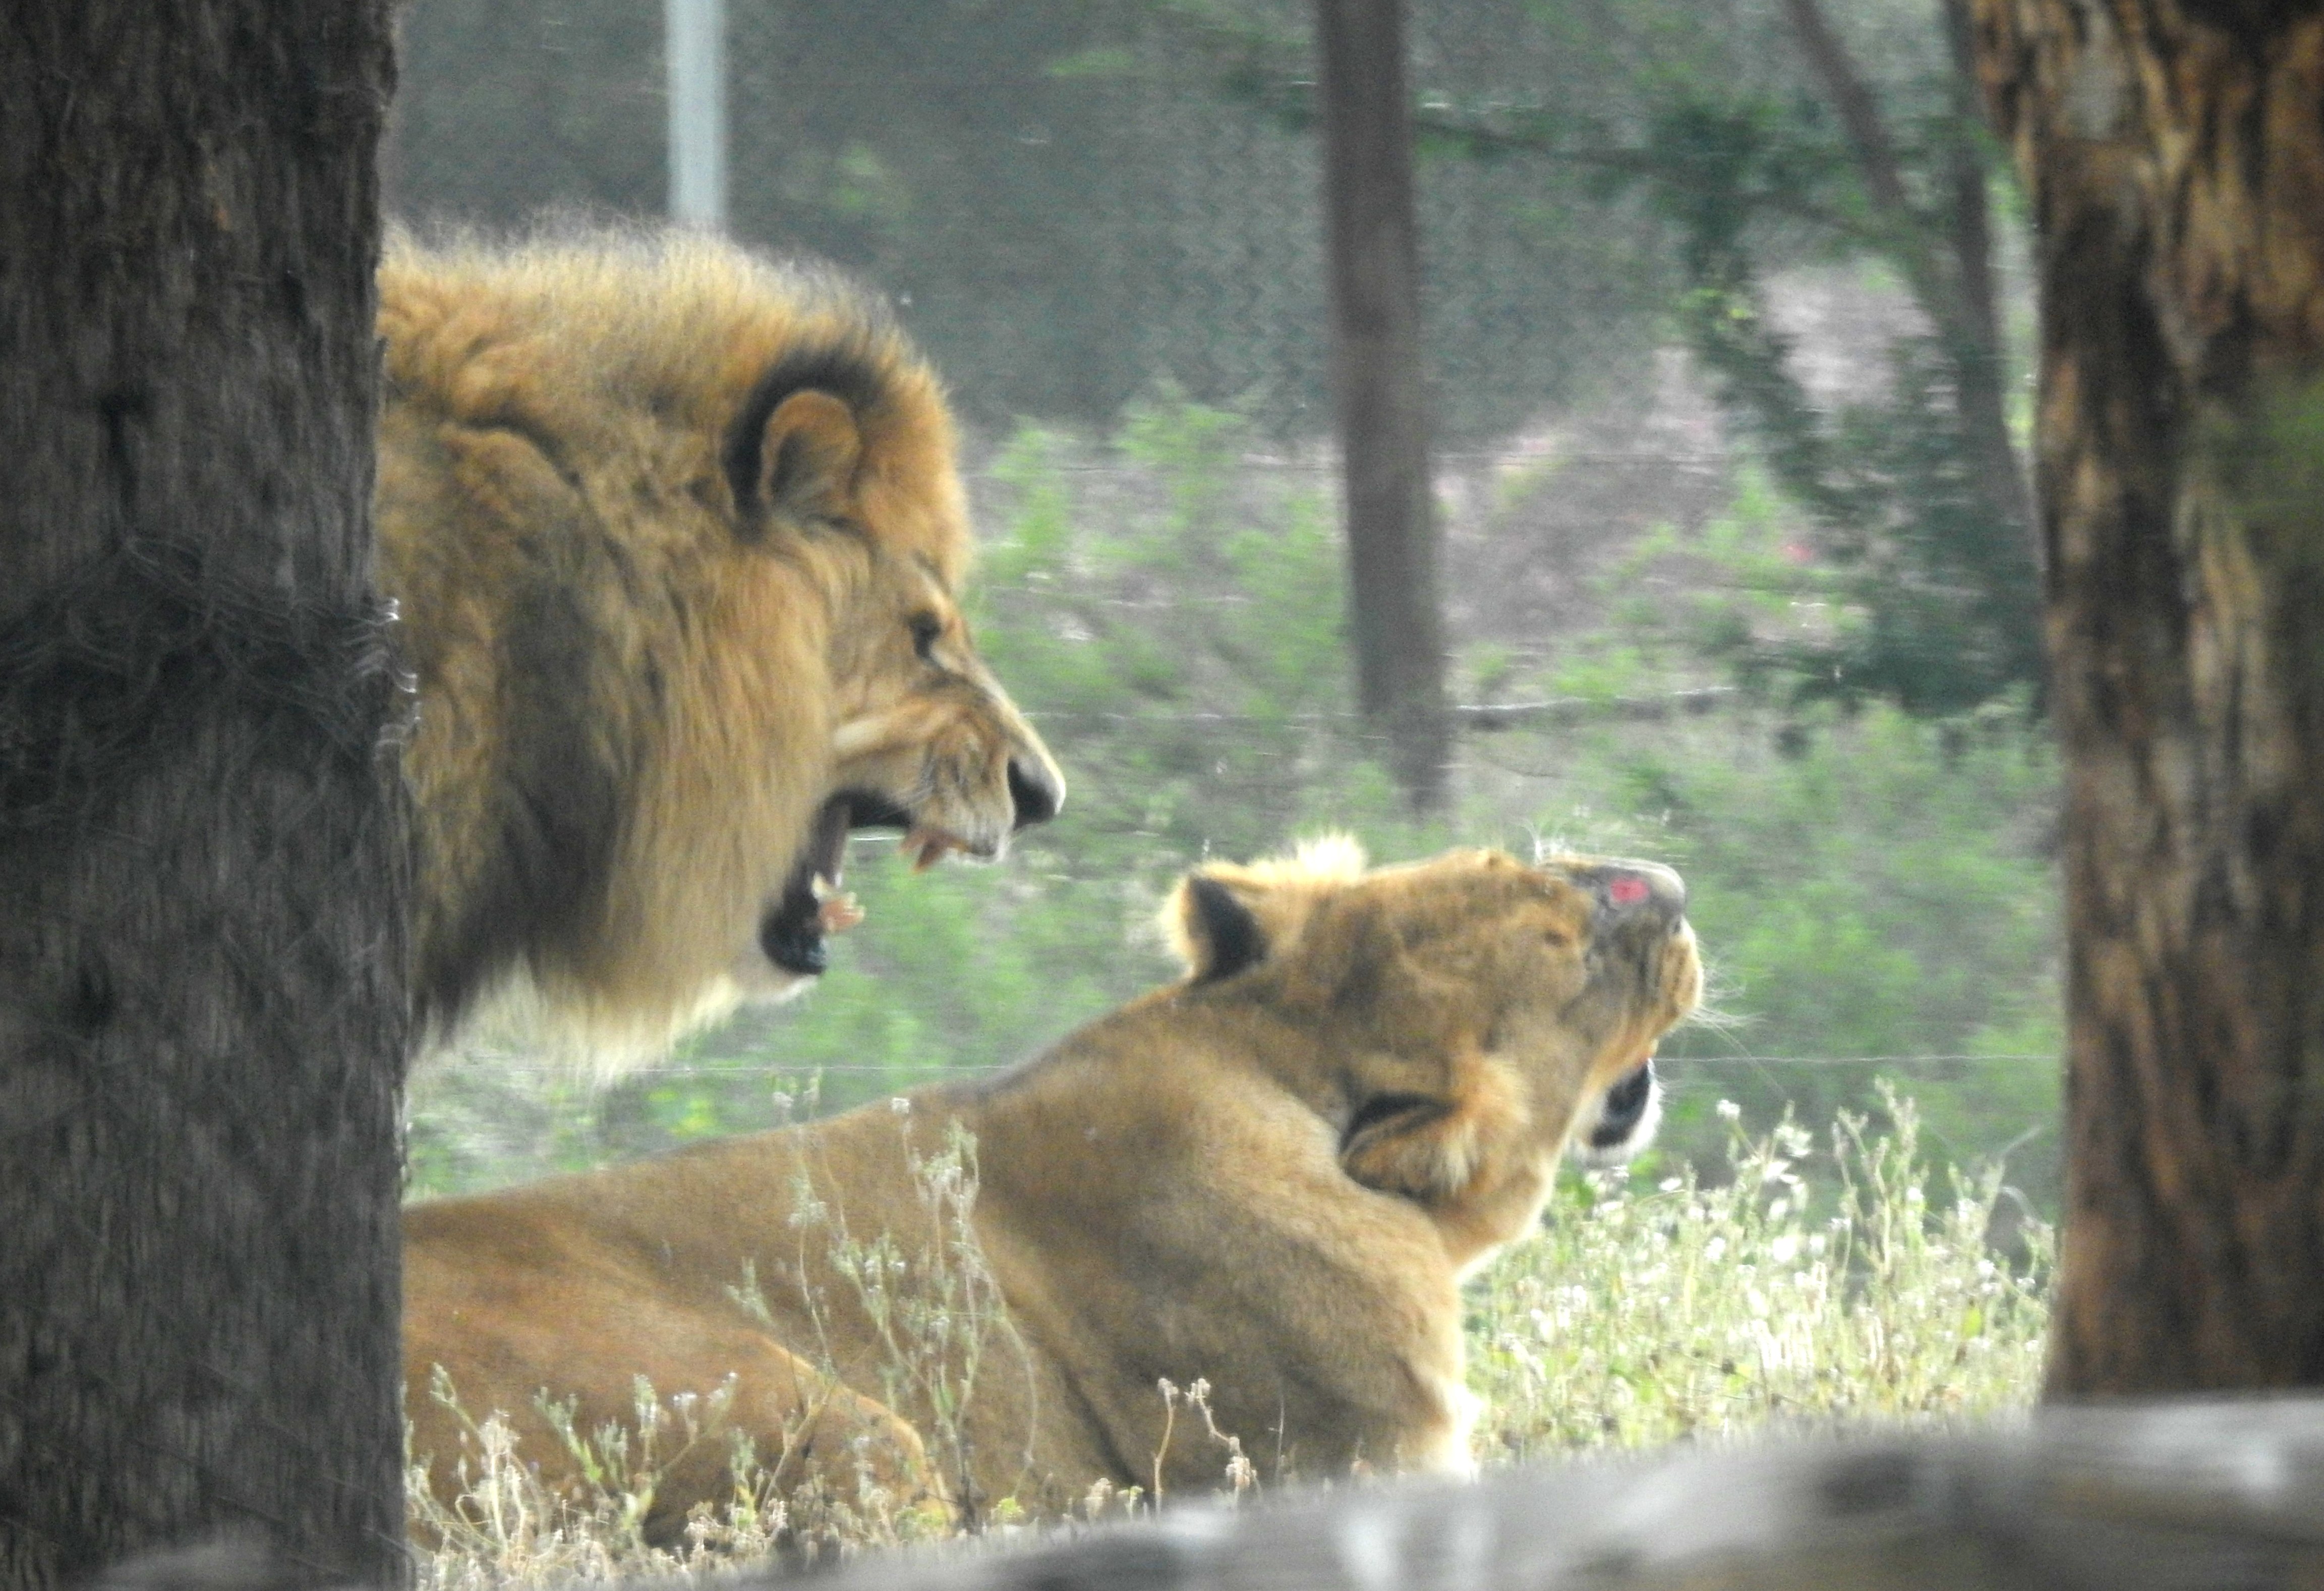 Photographing the lions through the window